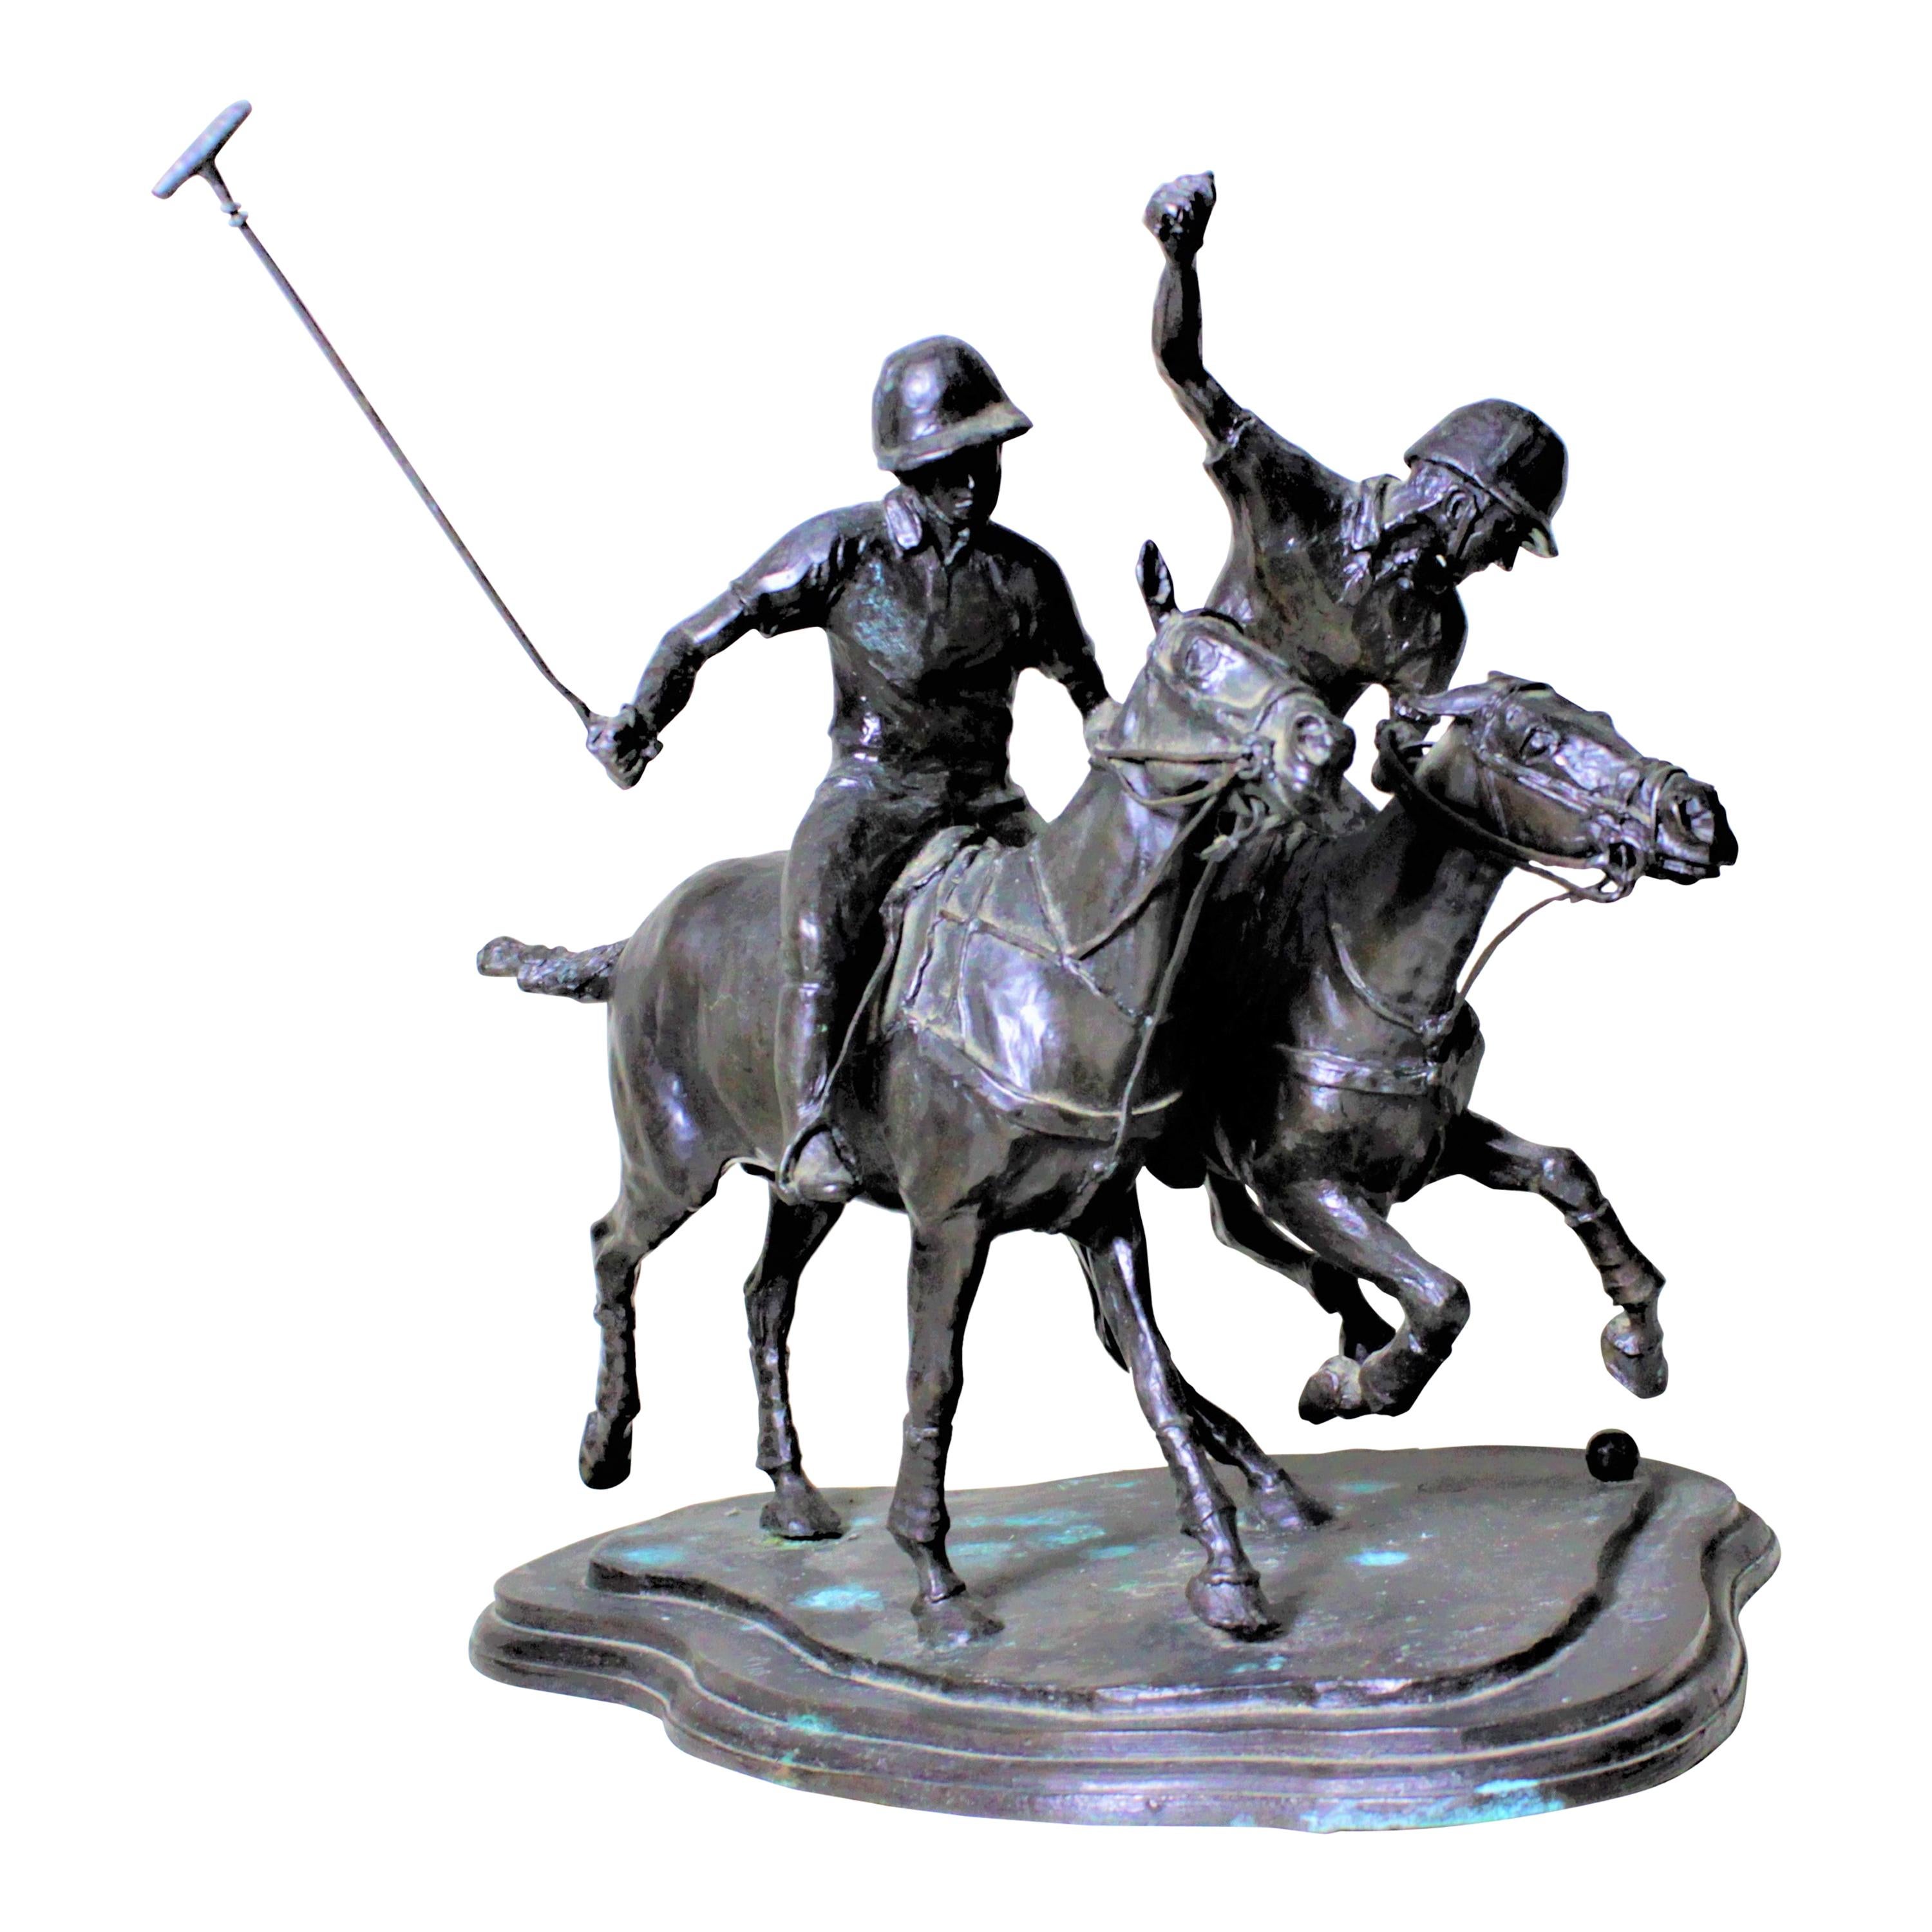 Large Signed Antique Bronze Polo Players Sculpture Titled "The Ride Off" For Sale